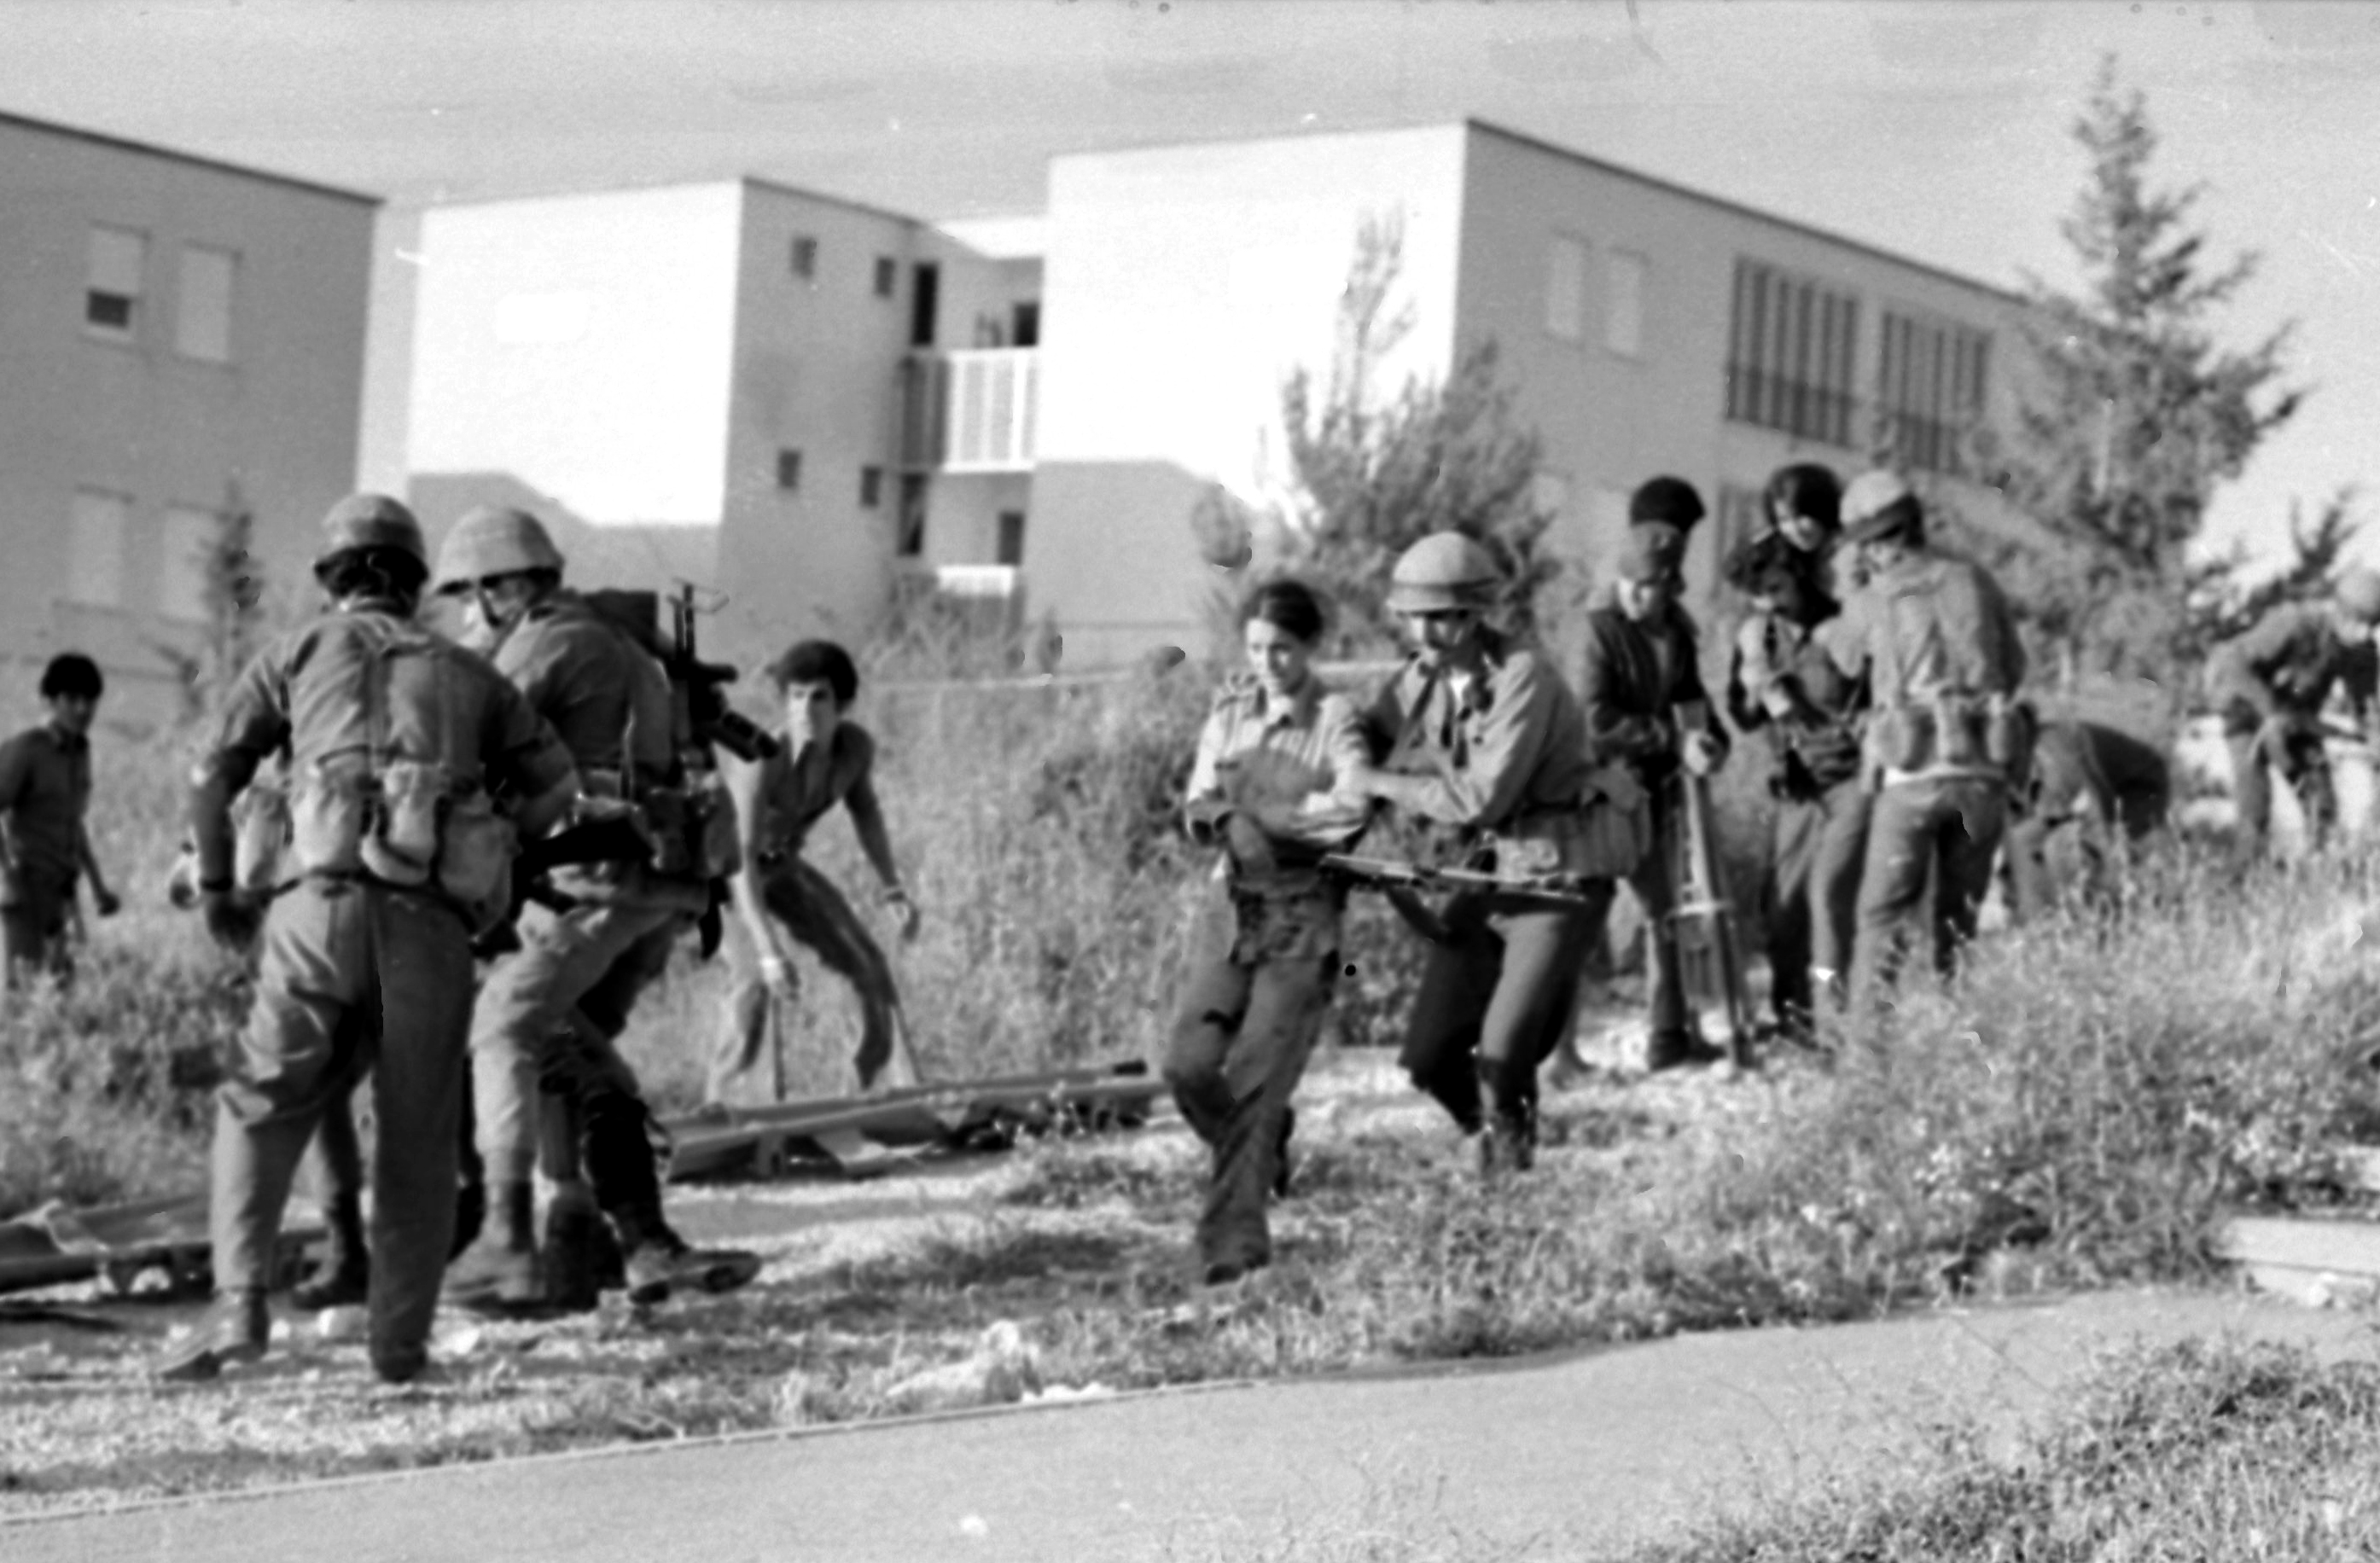 An Arab terrorist group attacked a school at Maalot killing several children and wounded thenth of them. IDF attacked the group killing the terrorists. Photo shows: Soldier rescue wounded children from the school 1974/05/15 Copyright © IPPA 09239-007-02 Photo by IPPA Staff